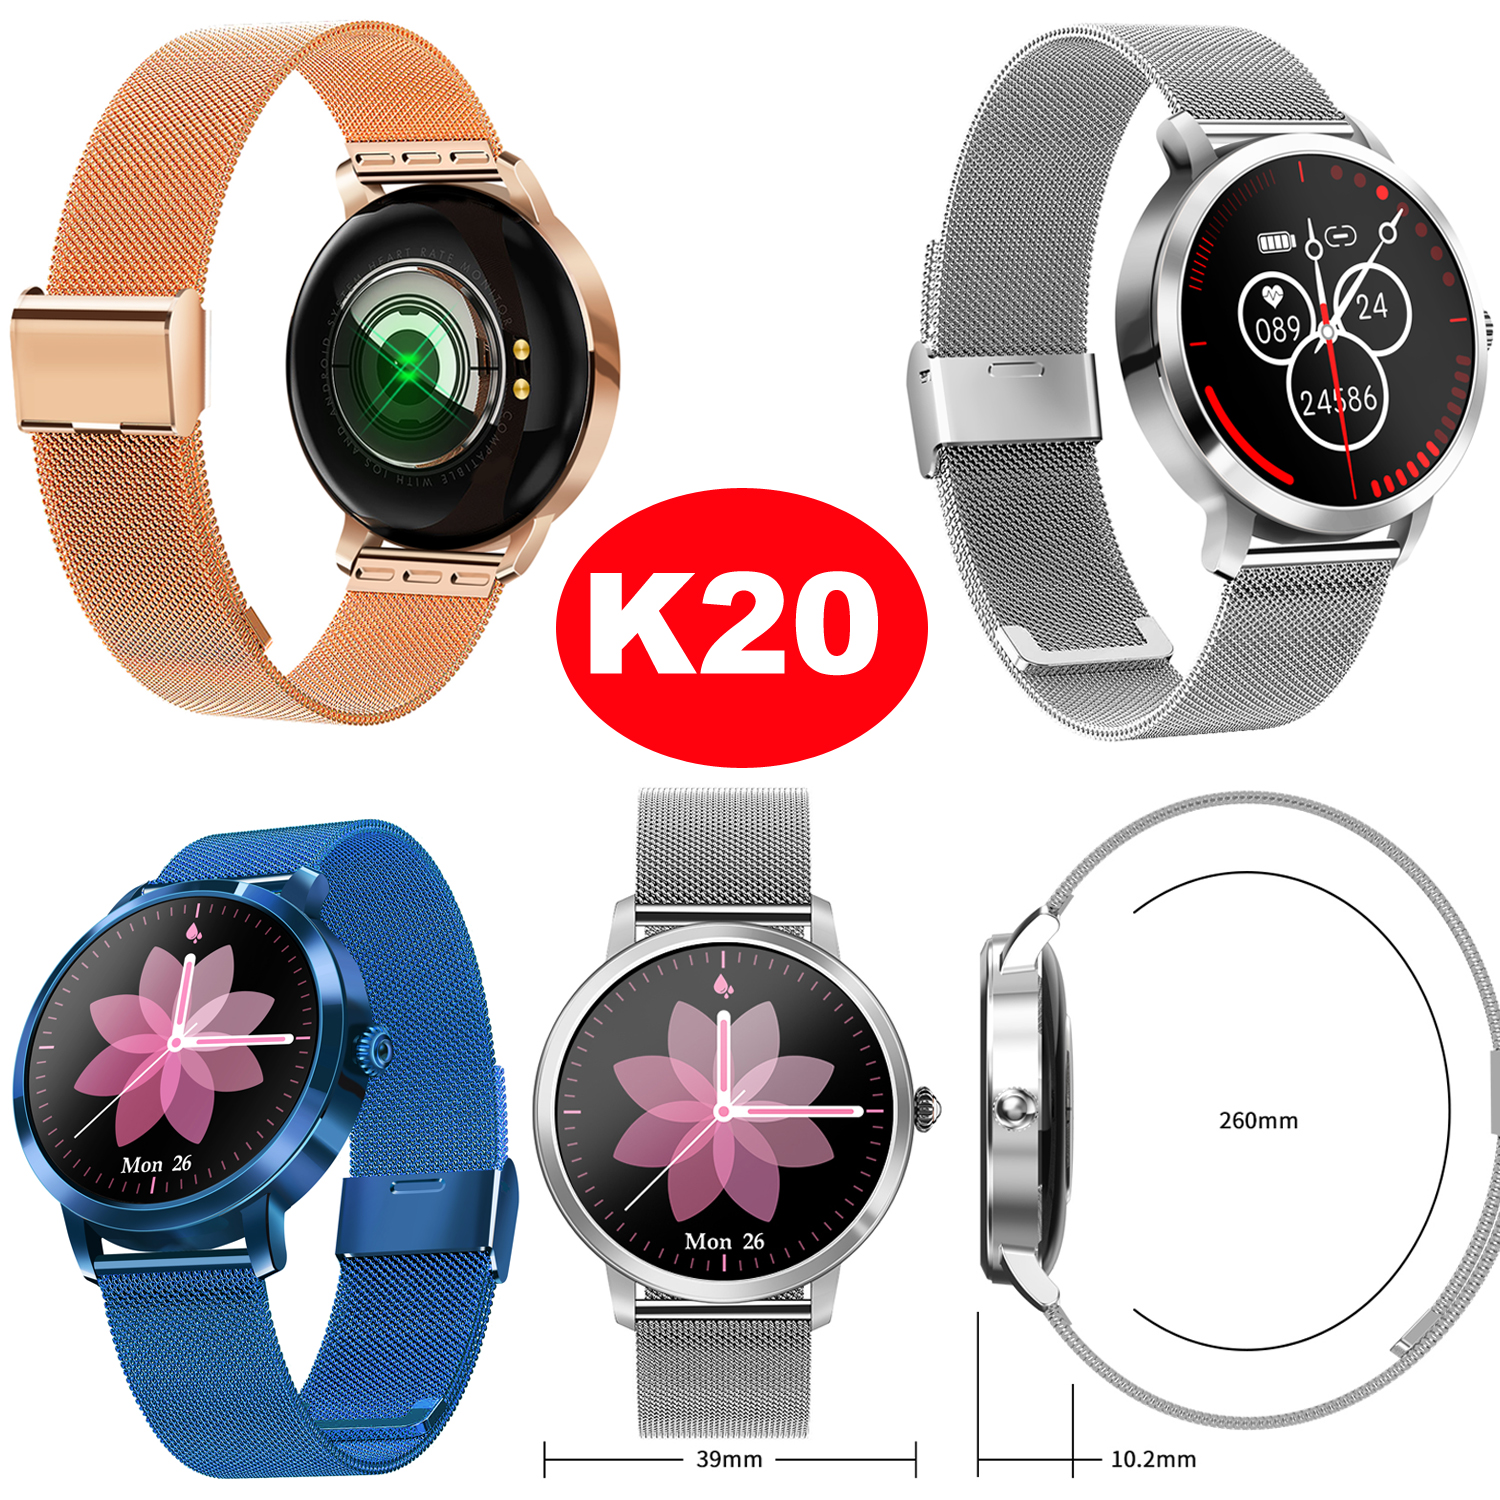 2021 New Bluetooth 5.0 Smart bracelet watch with Heart rate Blood pressure Monitor K20